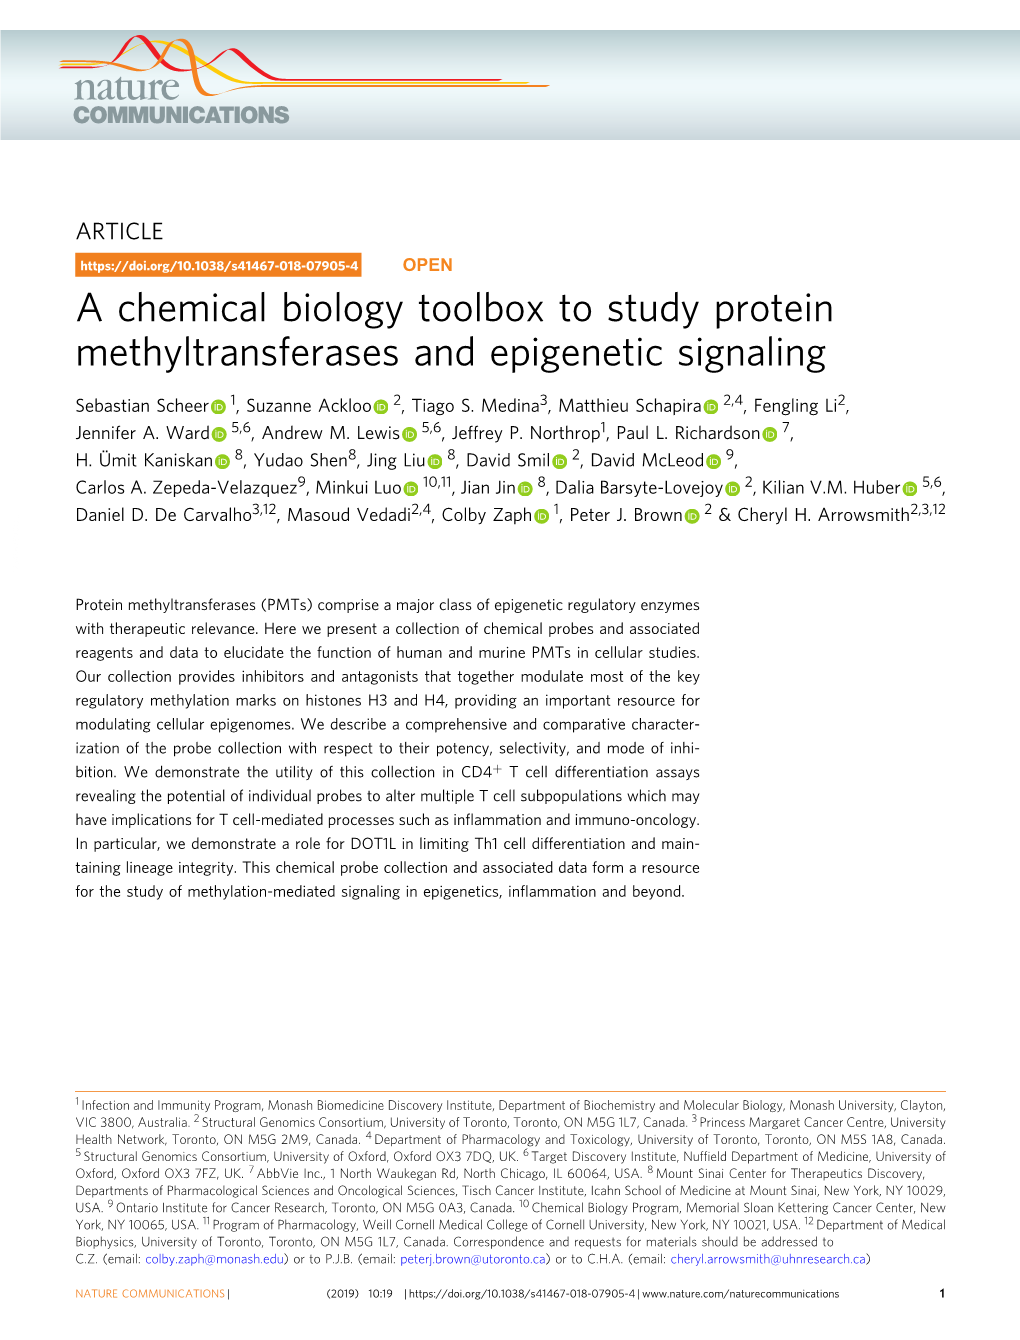 A Chemical Biology Toolbox to Study Protein Methyltransferases and Epigenetic Signaling